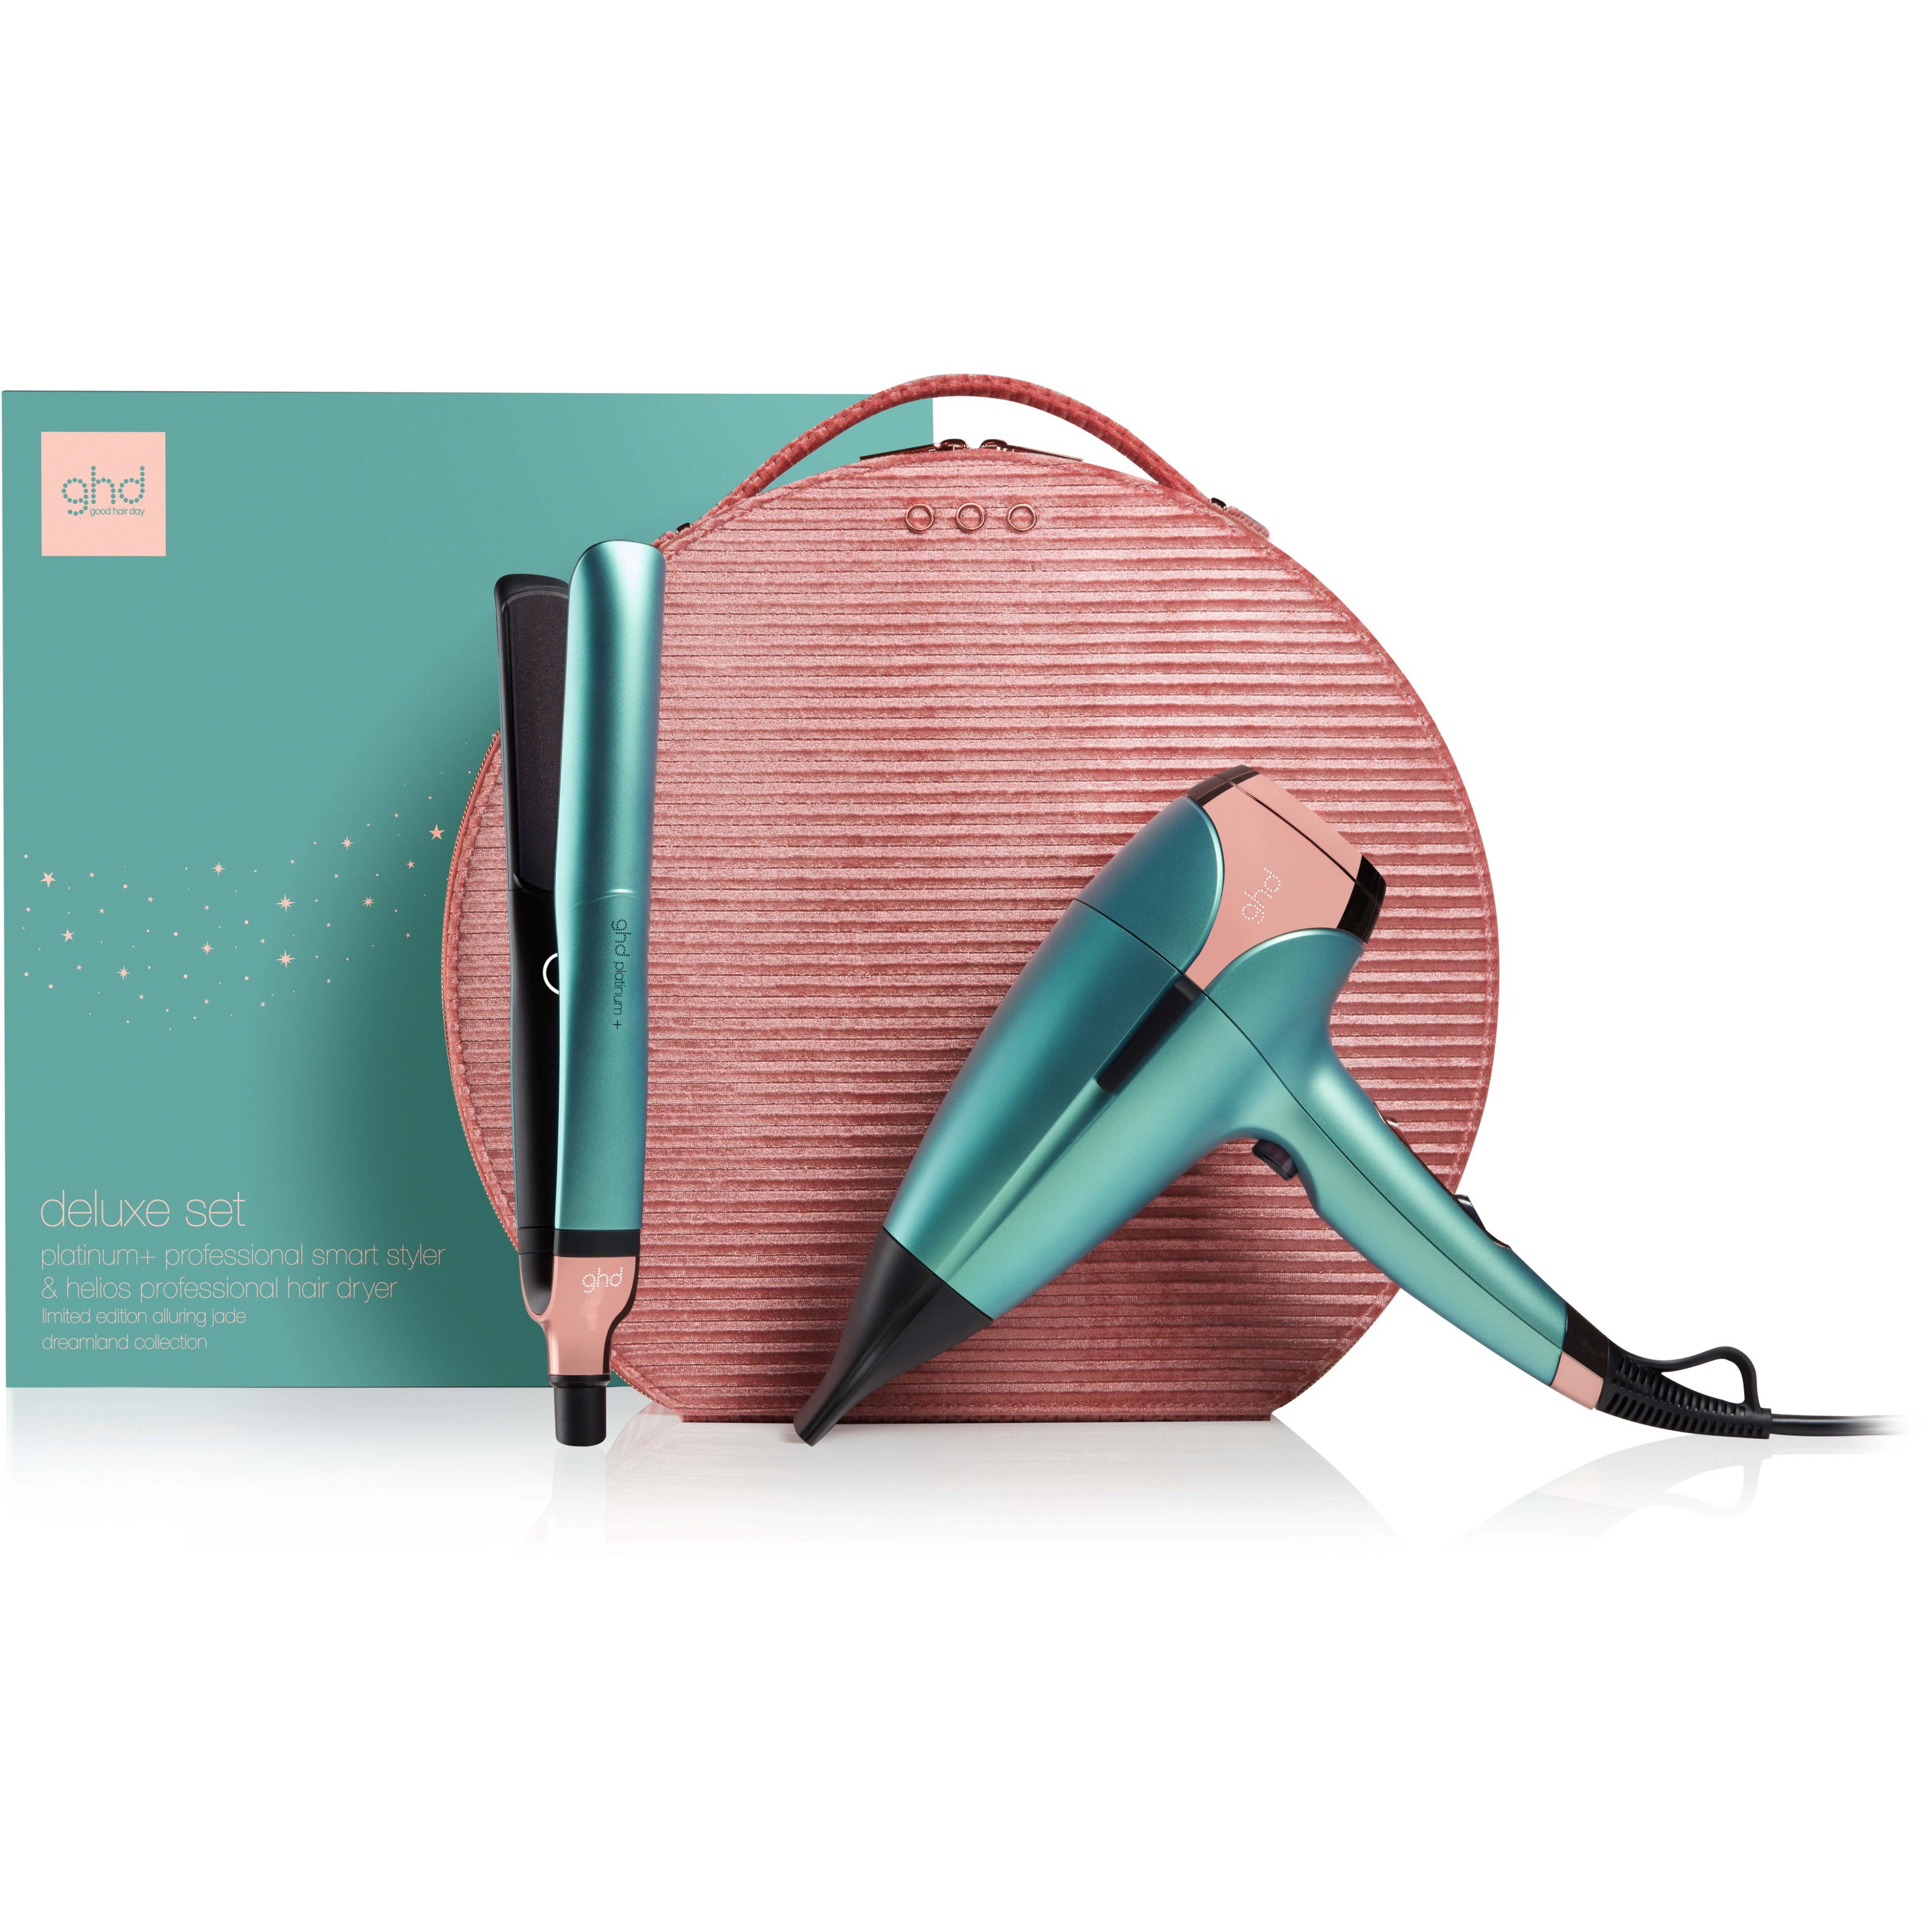 Läs mer om ghd Dreamland Holiday Collection Deluxe Limited Edition Gift Set